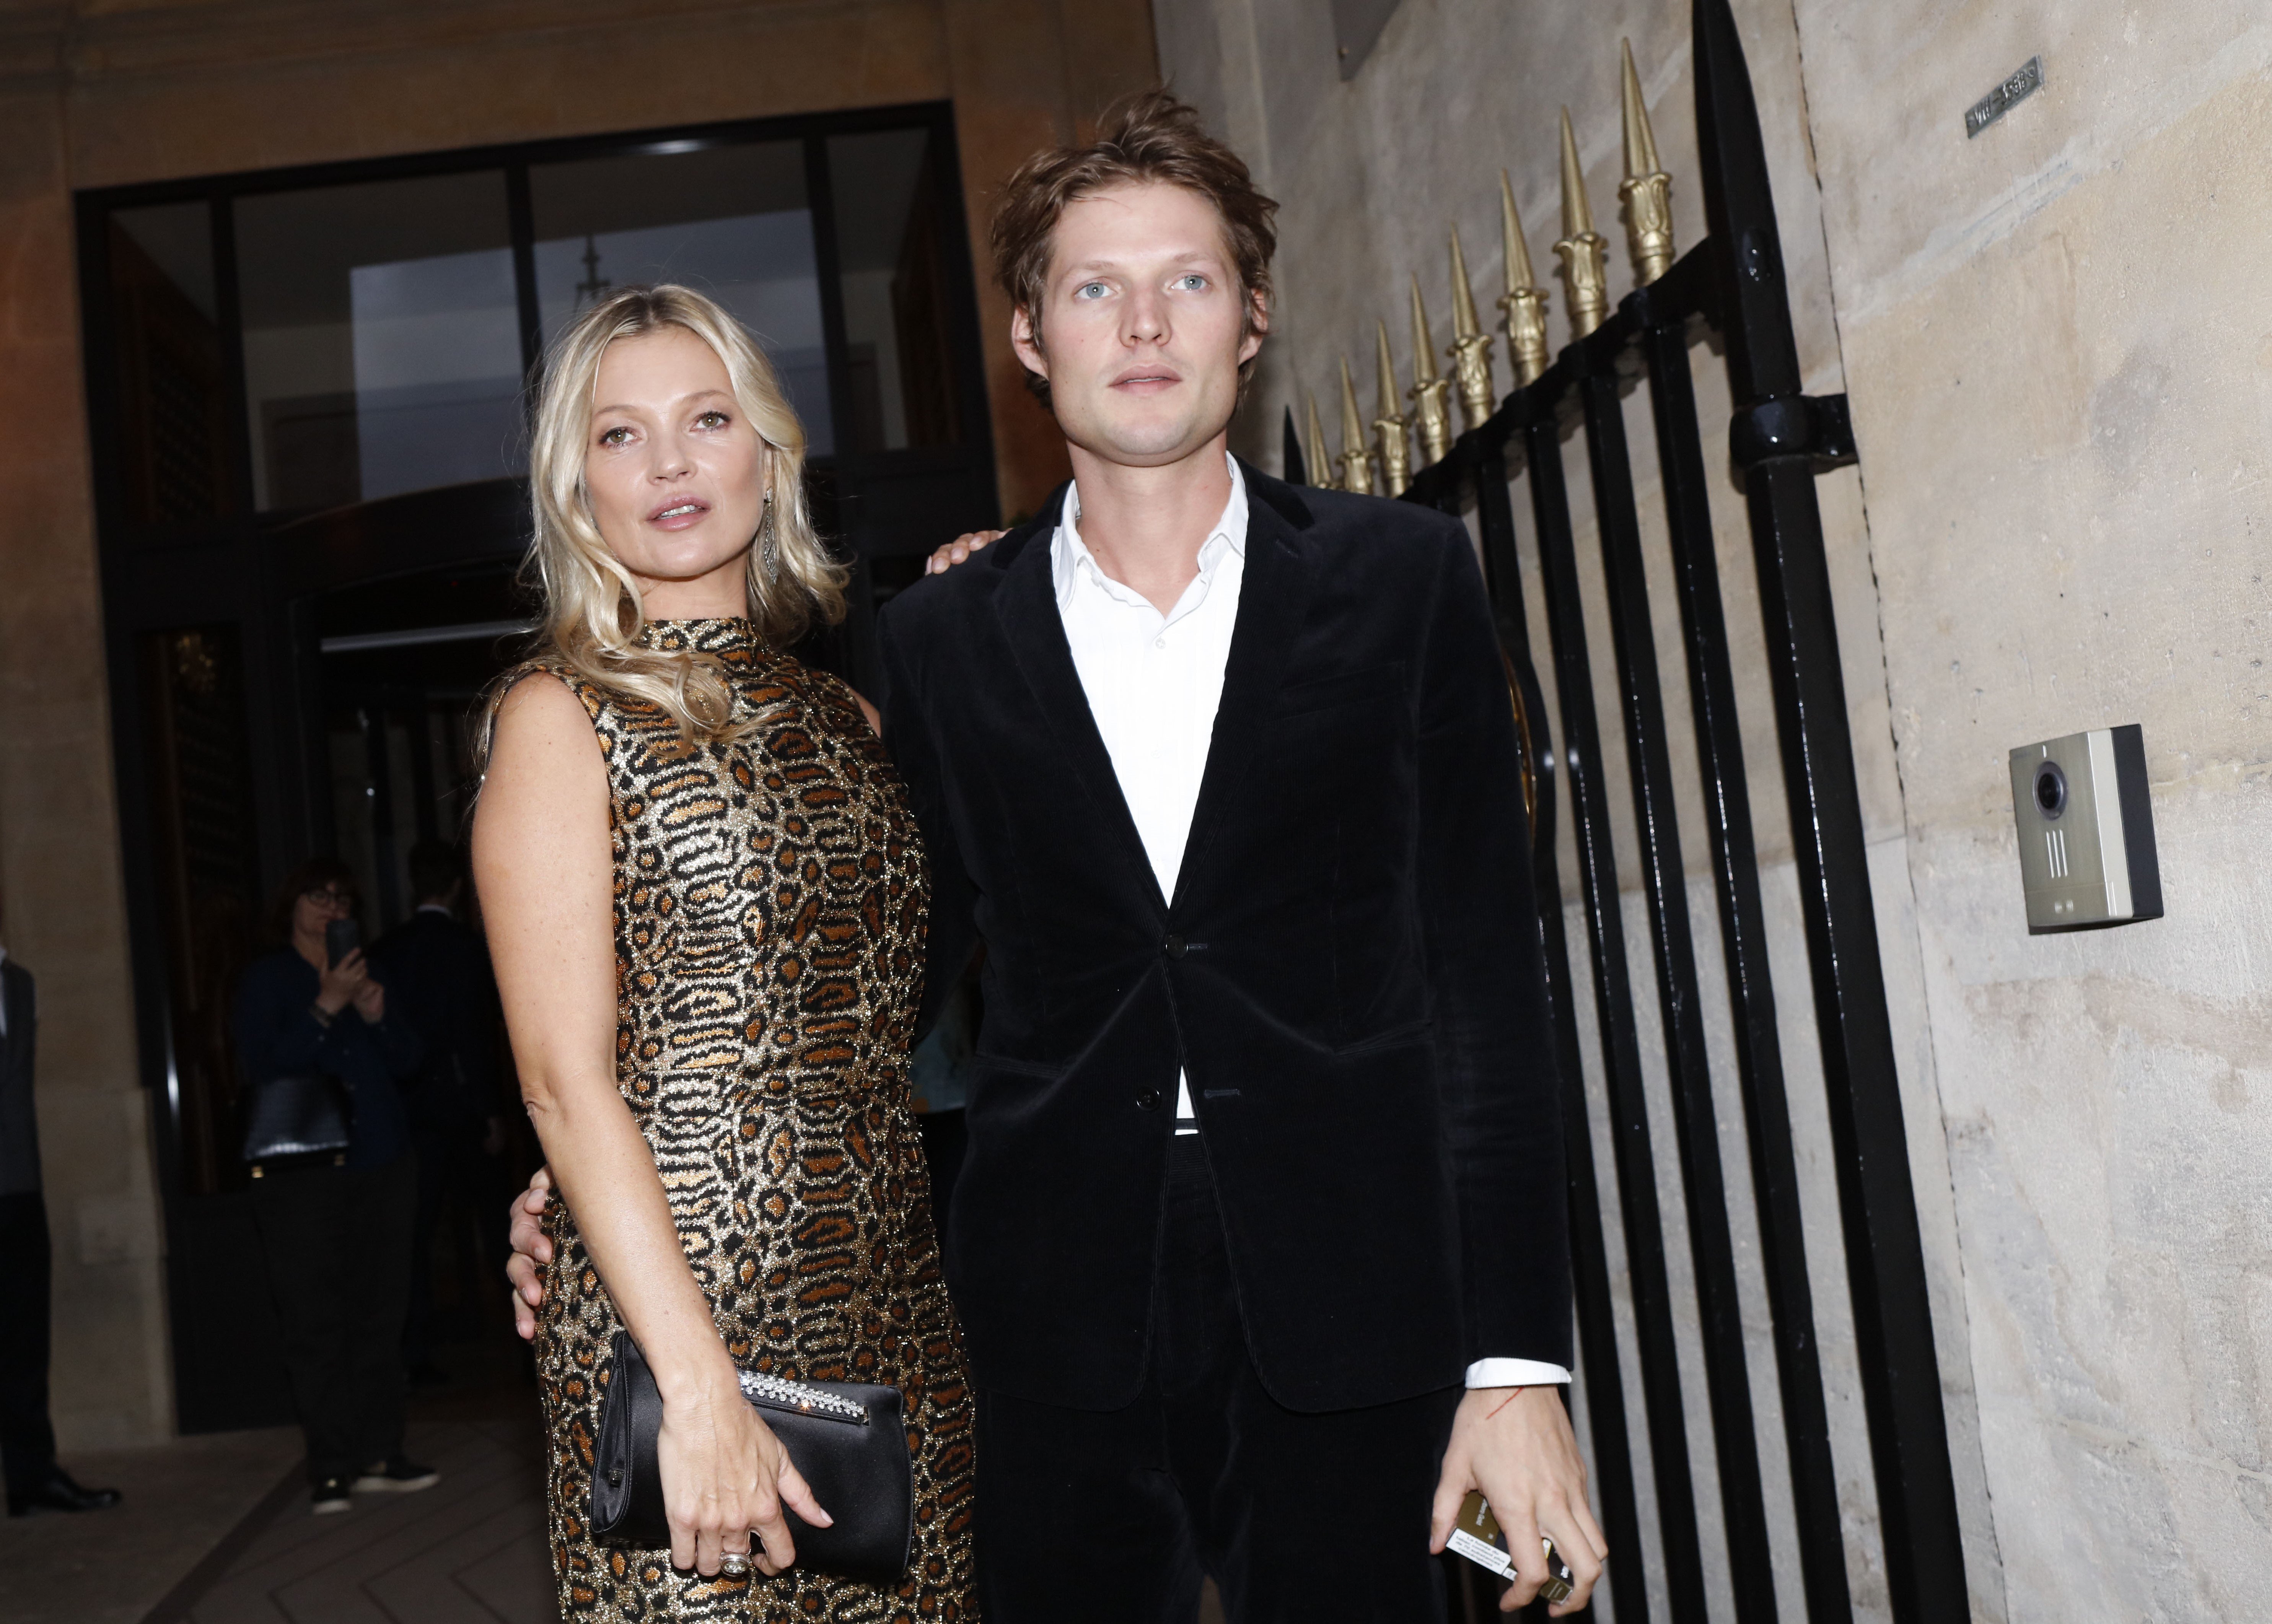 Kate Moss, who is older than her boyfriend Nikolai von Bismarck, pose for a photo together outside The Hotel De Crillon